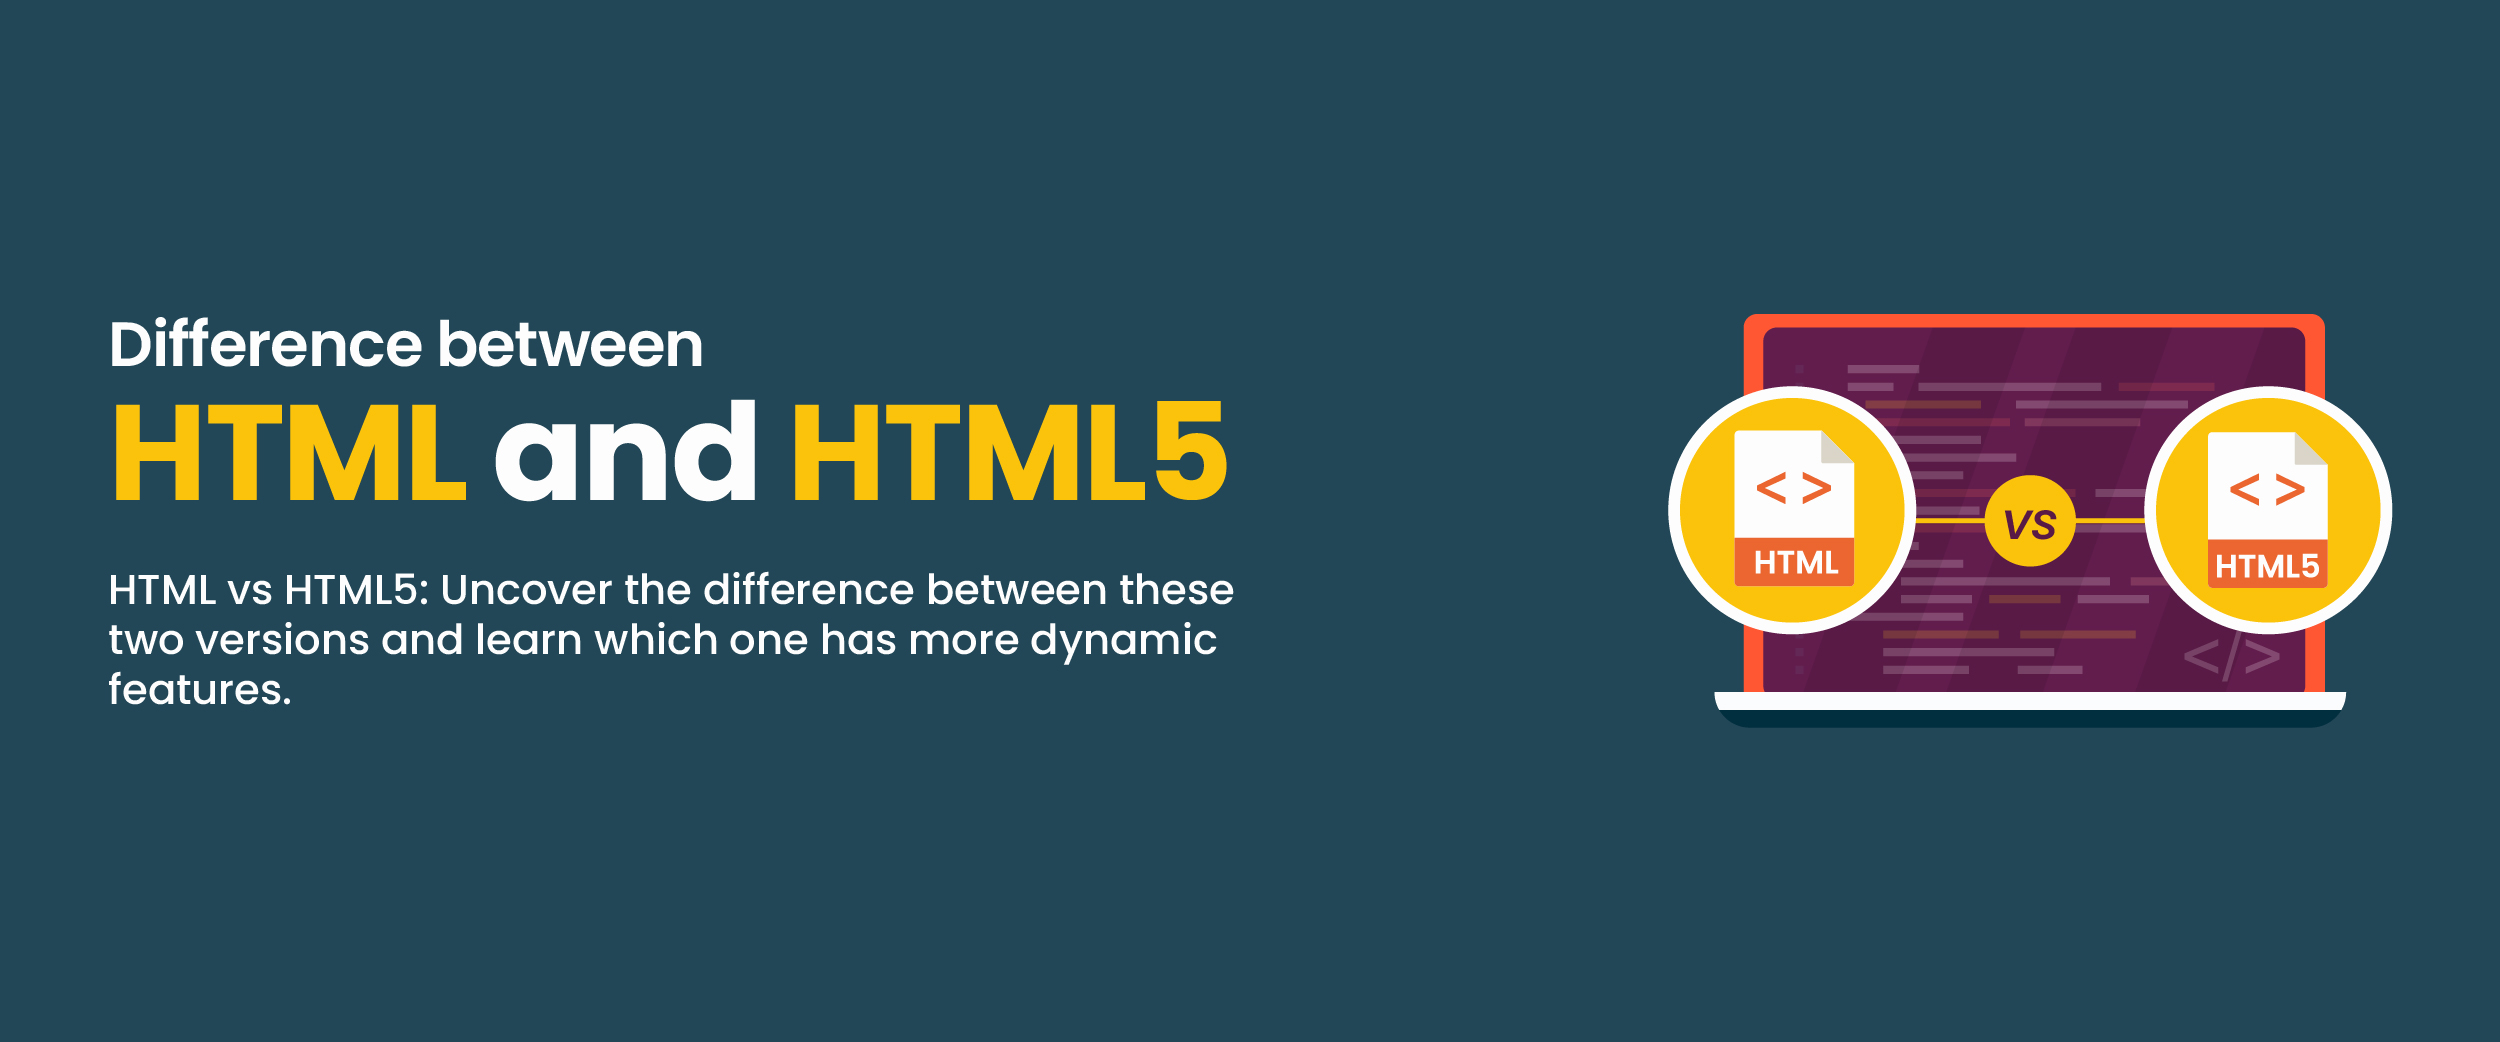 Difference between html and html5